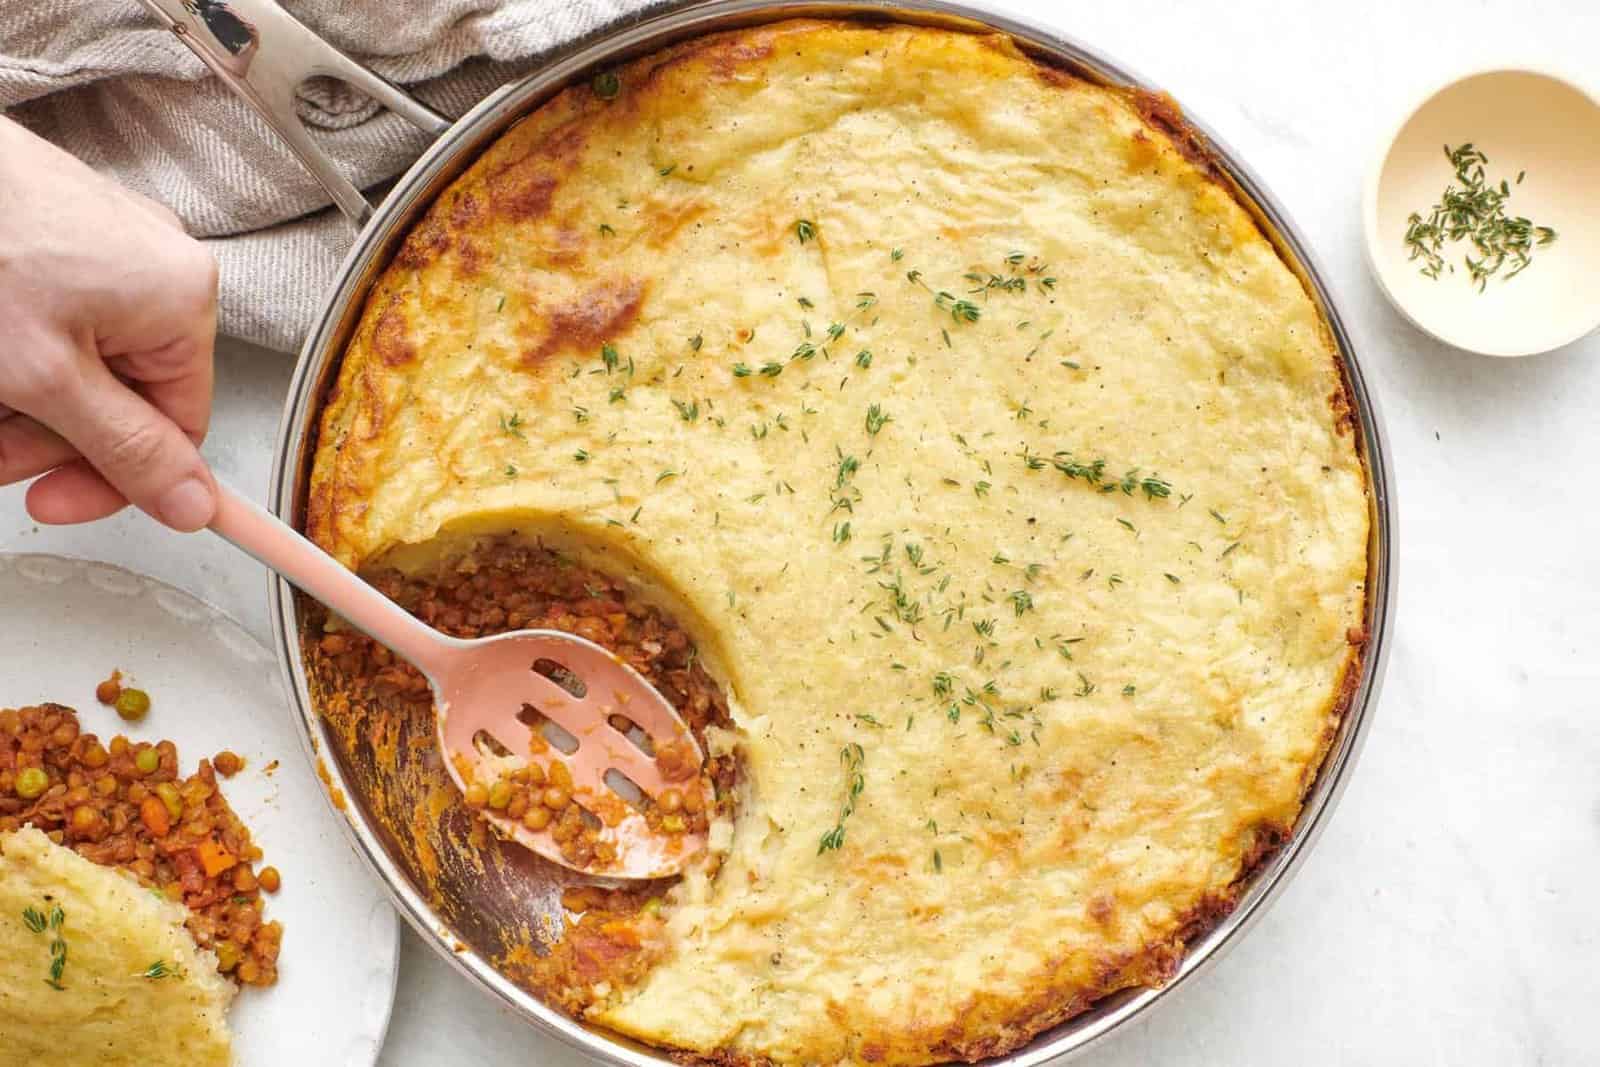 Lentil shepherd’s pie garnished with fresh thyme and a serving removed on a plate nearby, serving spoon dipped into skillet.